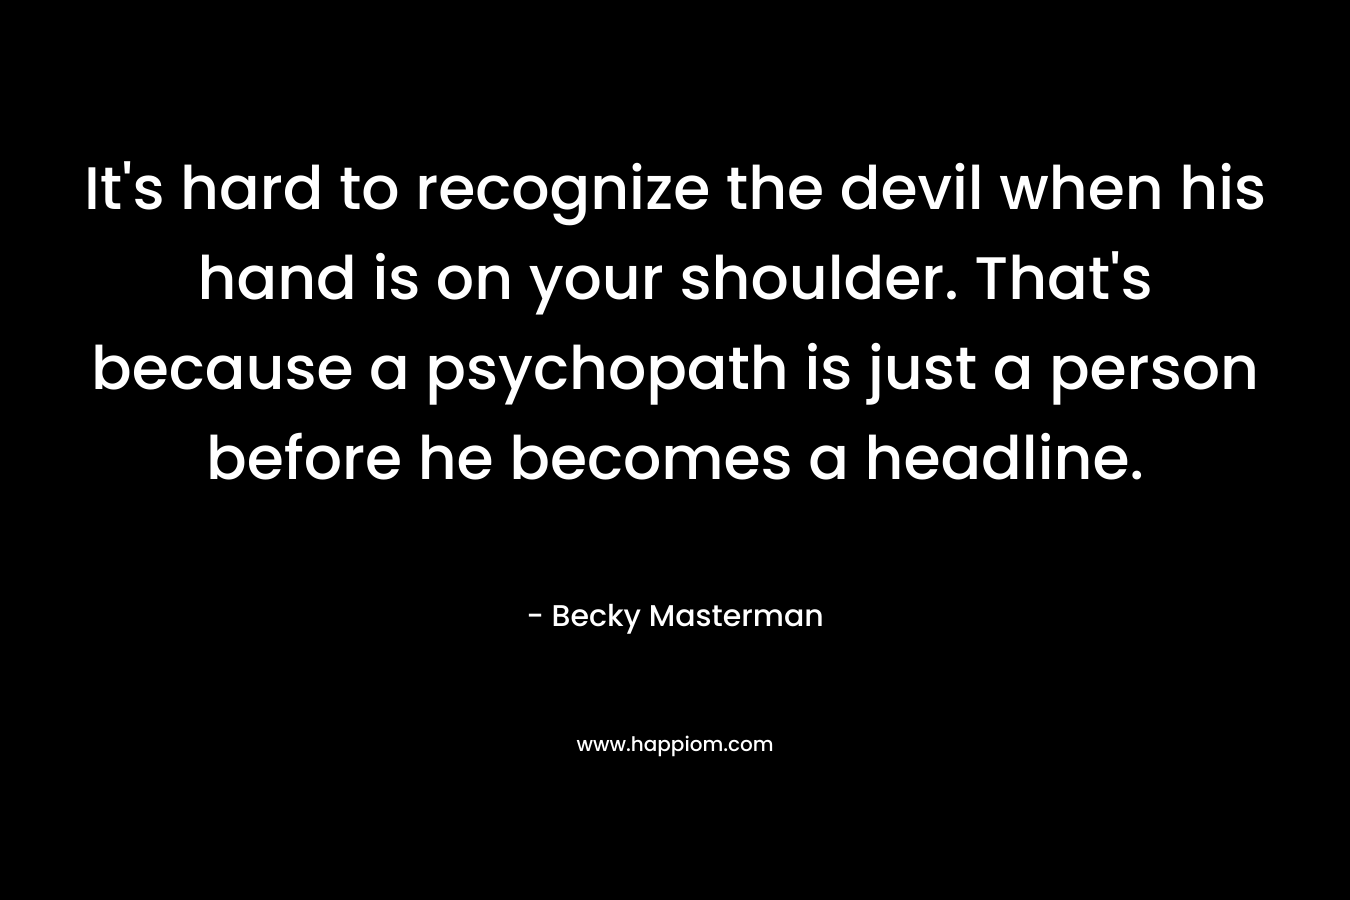 It’s hard to recognize the devil when his hand is on your shoulder. That’s because a psychopath is just a person before he becomes a headline. – Becky Masterman